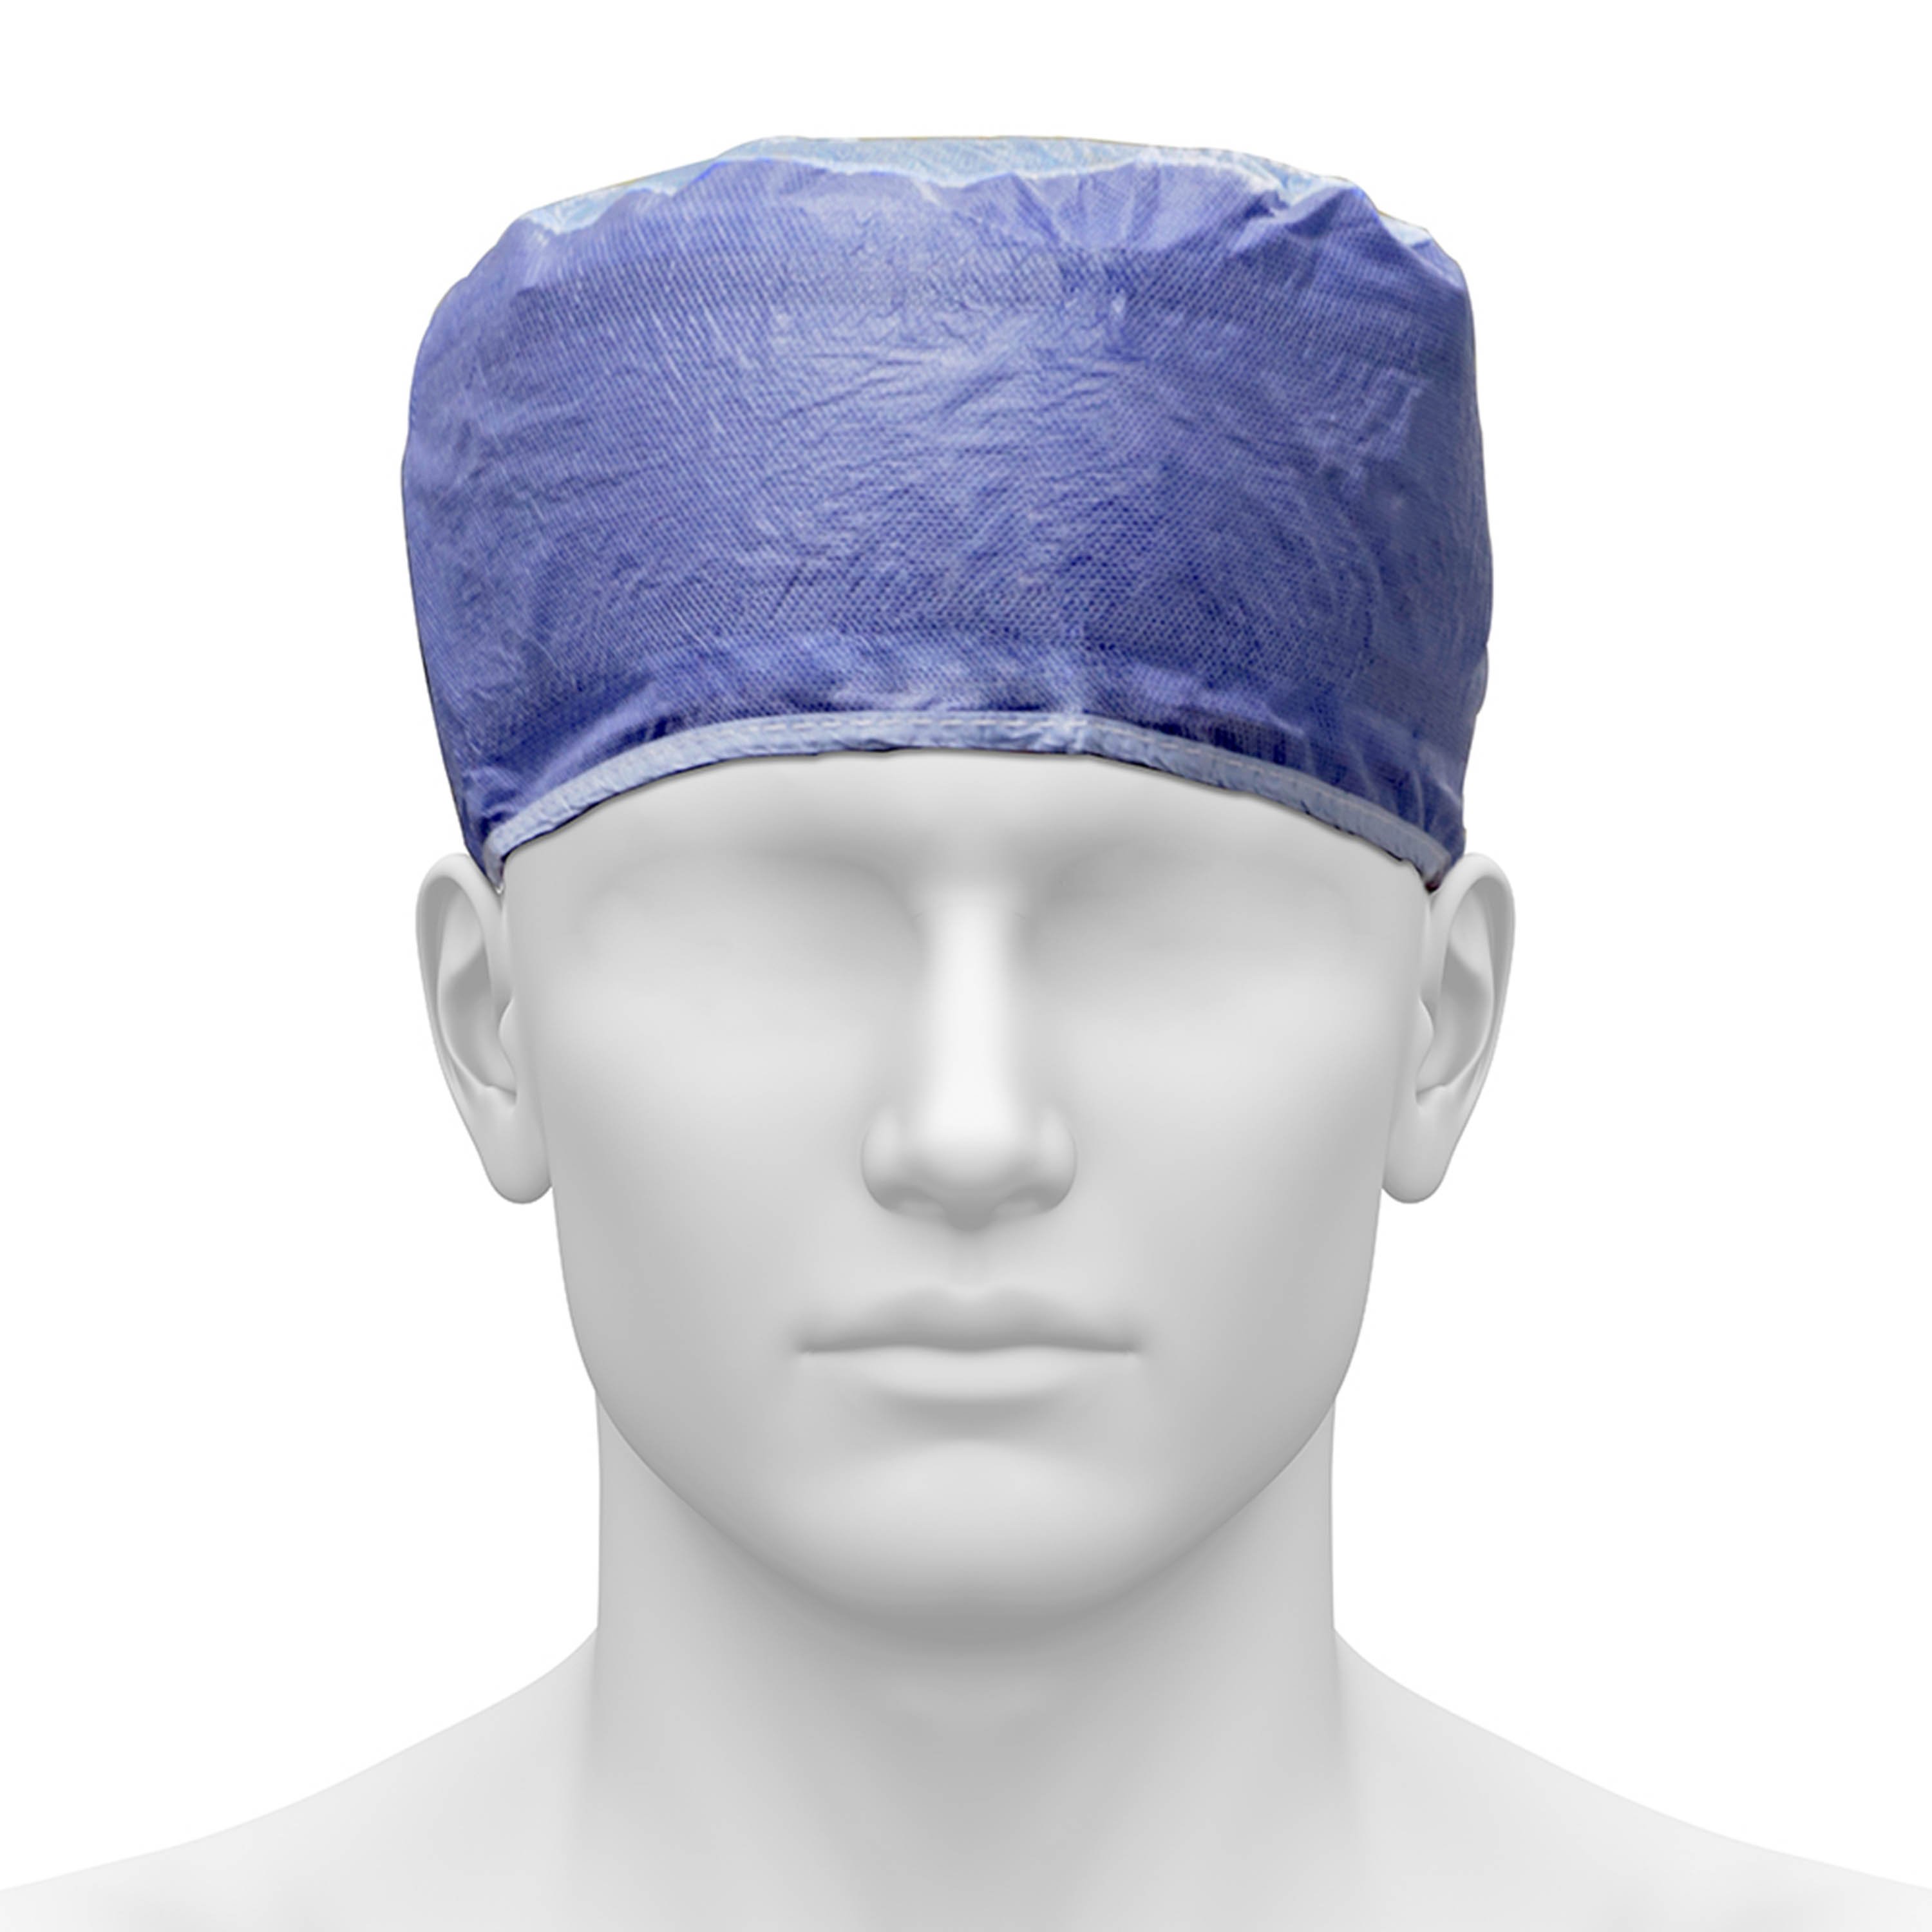 radiation protection hat, radiation protection hat Suppliers and  Manufacturers at